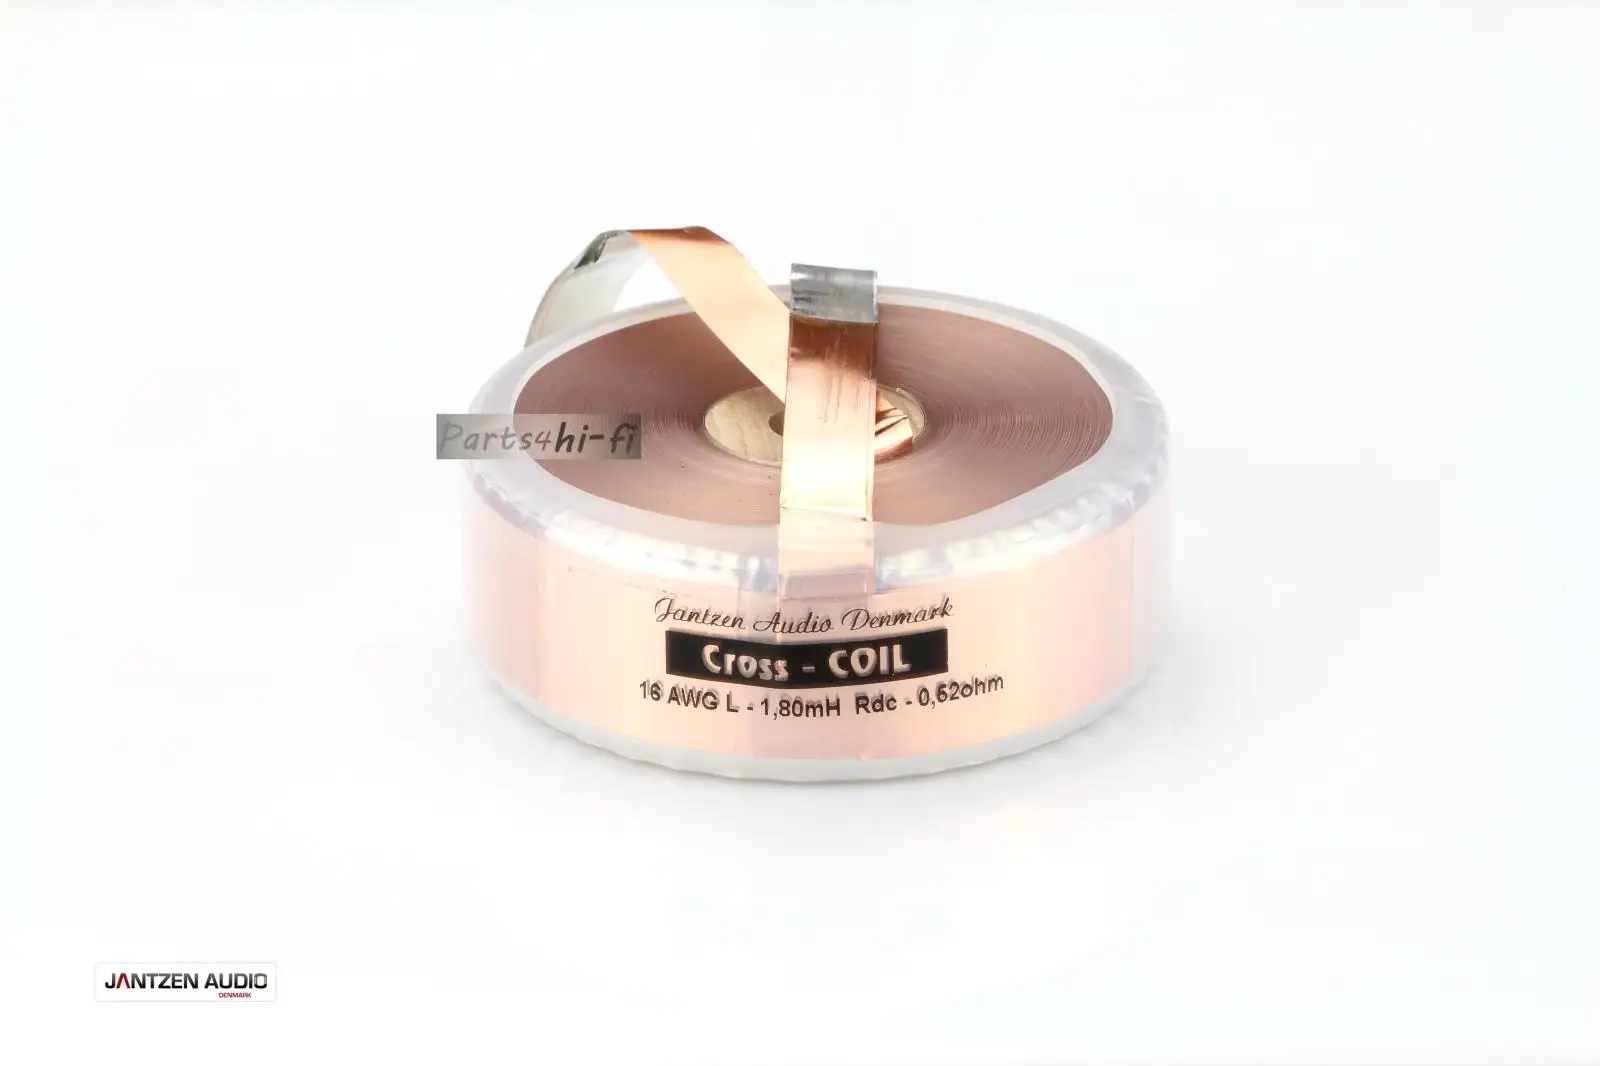 2pcs/lot Denmark Jantzen-audio Cross Coil Crossover/Copper Inductor 16AWG Series free shipping